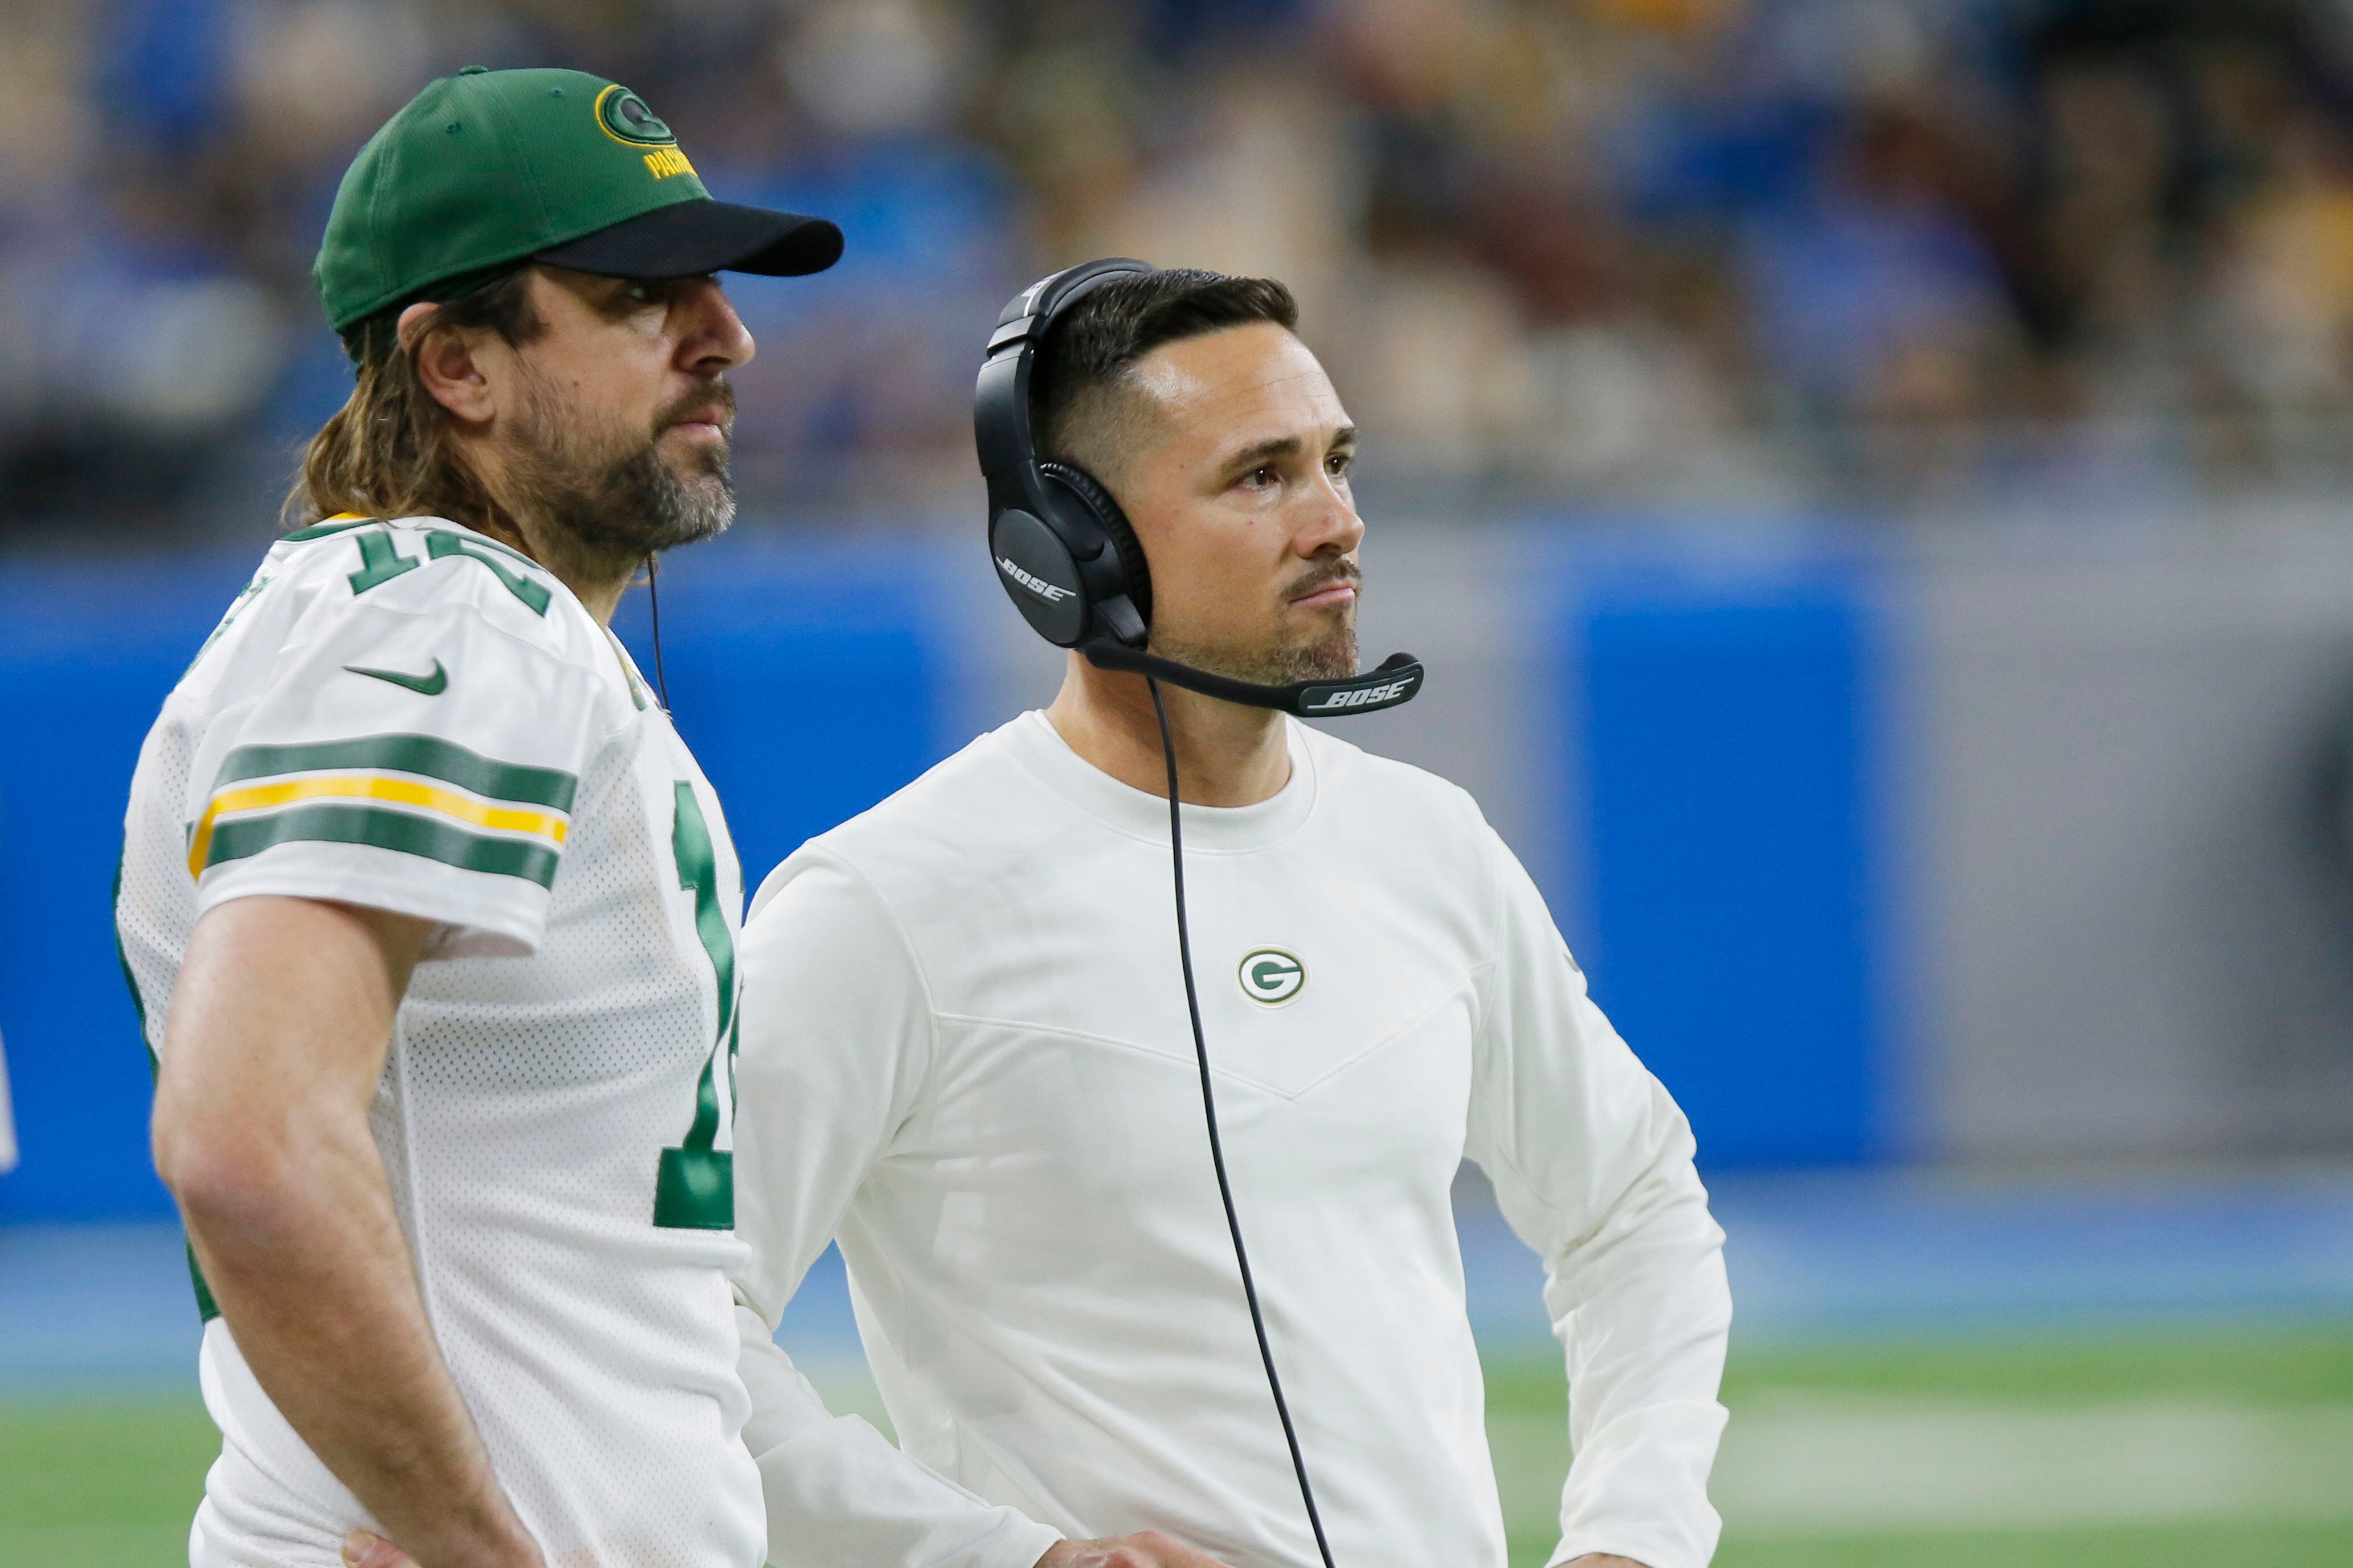 Rodgers fine, sits 2nd half, top seed Packers lose to Lions